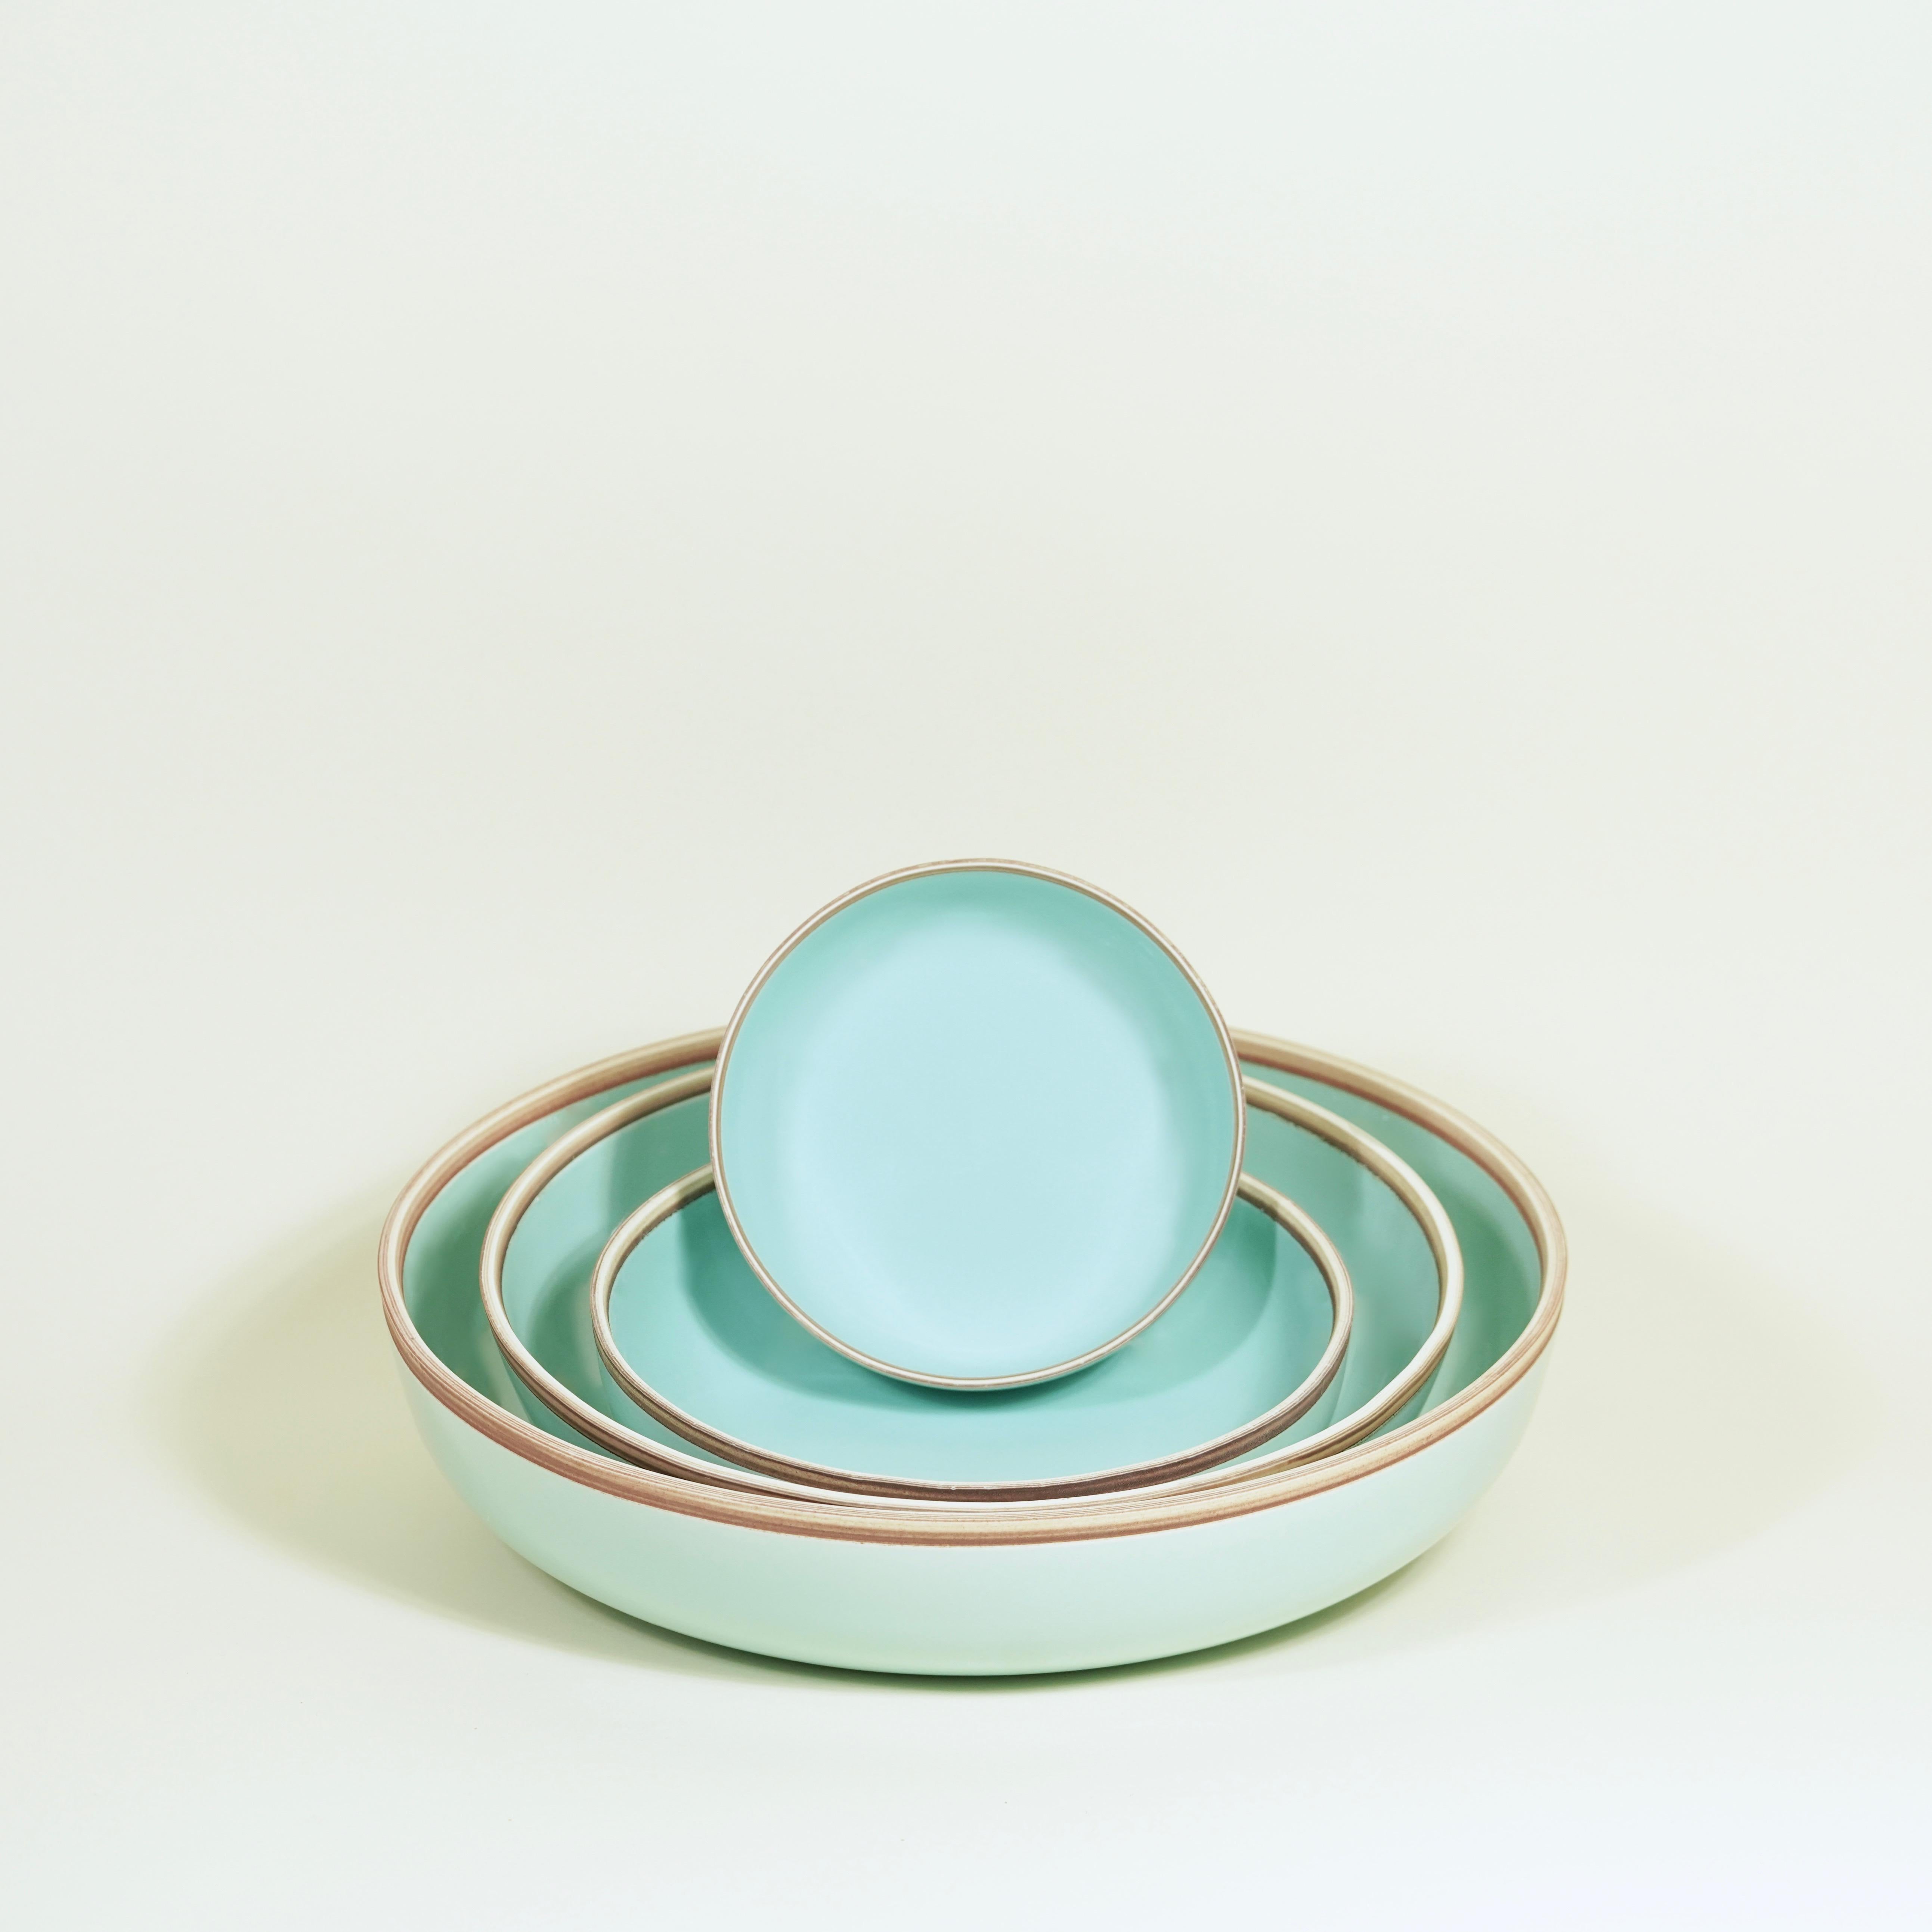 Molded Small Celadon Glazed Porcelain Hermit Bowl with Rustic Rim